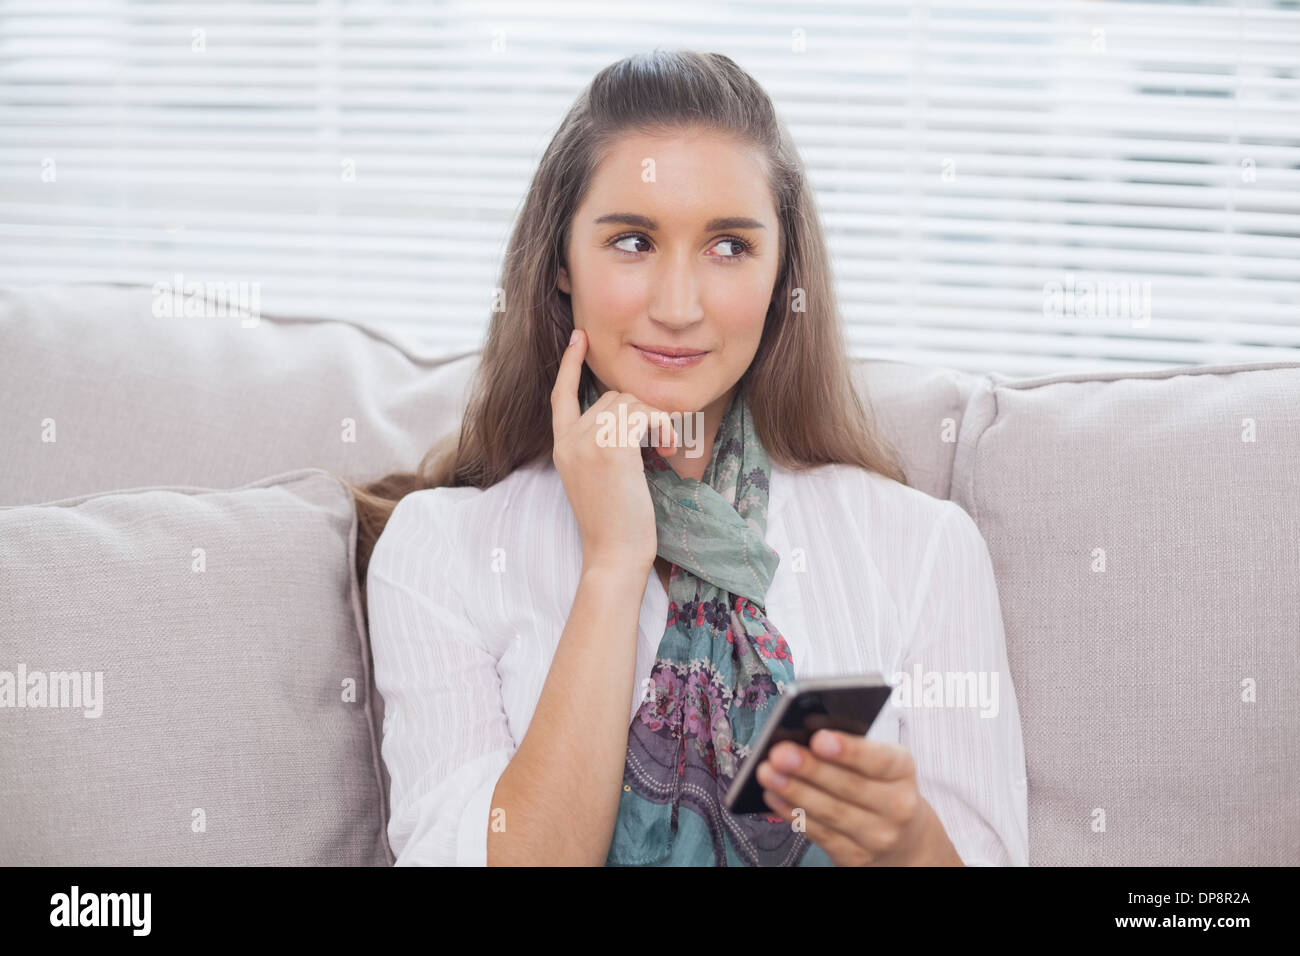 Pensive pretty model text messaging Stock Photo